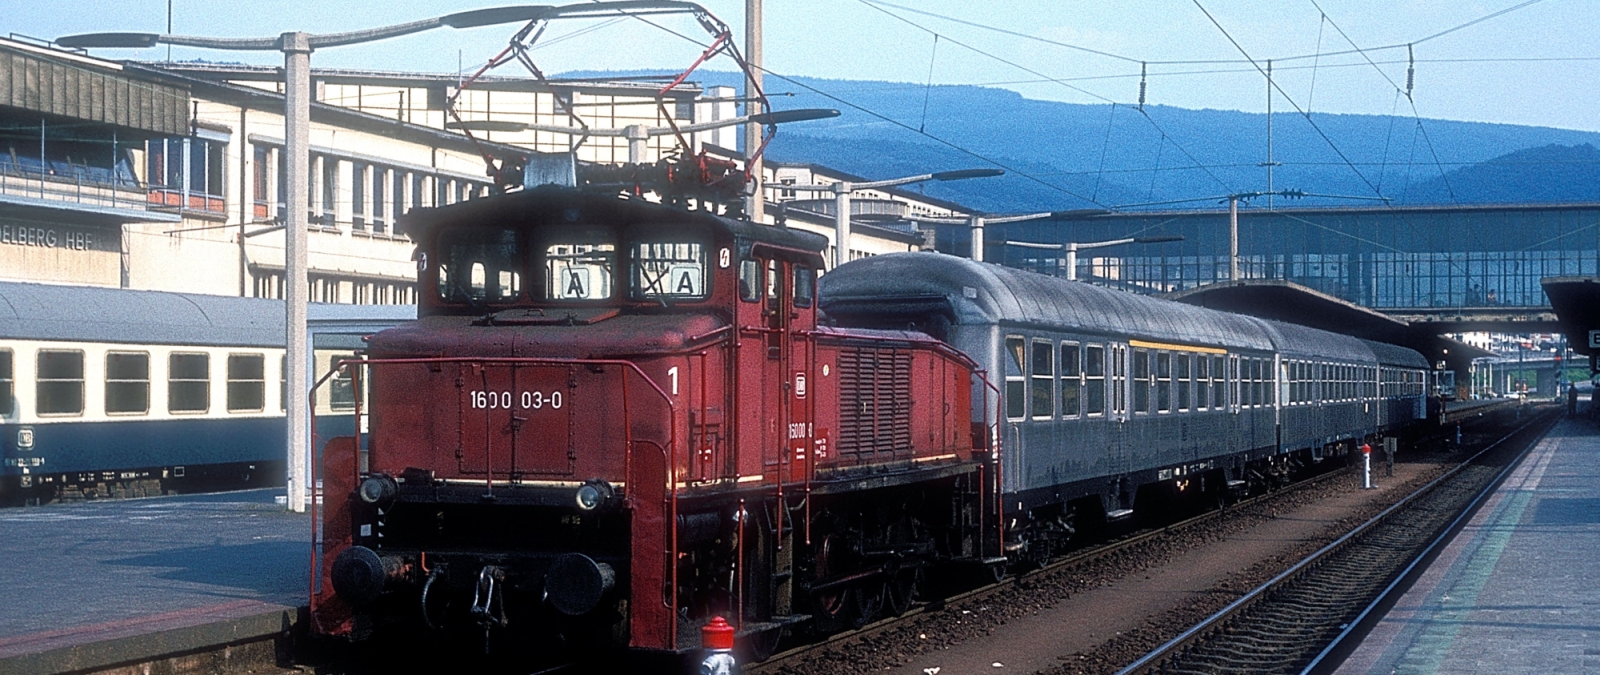 160 003 with some Silberling cars in September 1981 in Heidelberg